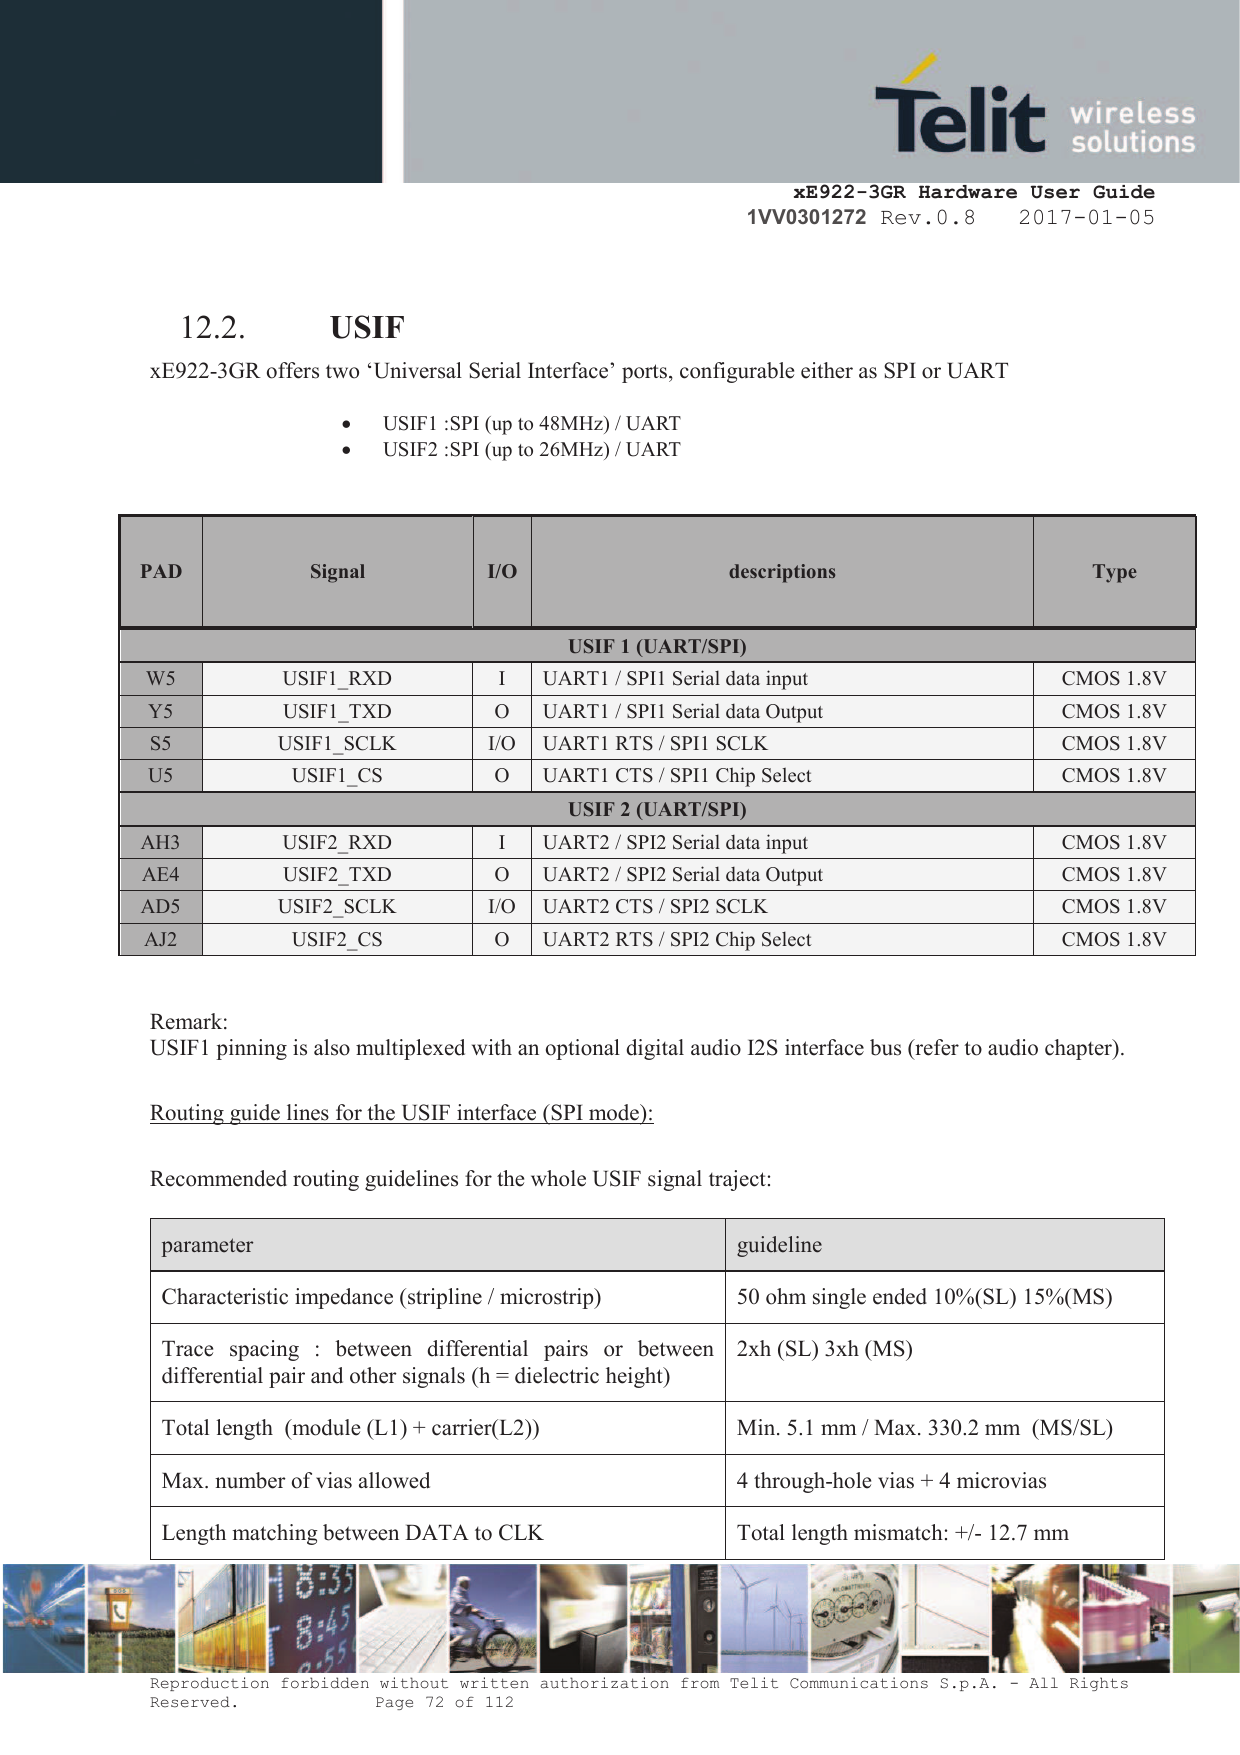     xE922-3GR Hardware User Guide 1VV0301272 Rev.0.8   2017-01-05 Reproduction forbidden without written authorization from Telit Communications S.p.A. - All Rights Reserved.    Page 72 of 112   12.2. USIF xE922-3GR offers two ‘Universal Serial Interface’ ports, configurable either as SPI or UART  · USIF1 :SPI (up to 48MHz) / UART  · USIF2 :SPI (up to 26MHz) / UART    PAD Signal I/O descriptions  Type  USIF 1 (UART/SPI) W5 USIF1_RXD I UART1 / SPI1 Serial data input CMOS 1.8V Y5 USIF1_TXD O UART1 / SPI1 Serial data Output CMOS 1.8V S5 USIF1_SCLK I/O UART1 RTS / SPI1 SCLK CMOS 1.8V U5 USIF1_CS O UART1 CTS / SPI1 Chip Select CMOS 1.8V USIF 2 (UART/SPI) AH3 USIF2_RXD I UART2 / SPI2 Serial data input CMOS 1.8V AE4 USIF2_TXD O UART2 / SPI2 Serial data Output CMOS 1.8V AD5 USIF2_SCLK I/O UART2 CTS / SPI2 SCLK CMOS 1.8V AJ2 USIF2_CS O UART2 RTS / SPI2 Chip Select CMOS 1.8V   Remark: USIF1 pinning is also multiplexed with an optional digital audio I2S interface bus (refer to audio chapter).  Routing guide lines for the USIF interface (SPI mode):  Recommended routing guidelines for the whole USIF signal traject:  parameter  guideline Characteristic impedance (stripline / microstrip) 50 ohm single ended 10%(SL) 15%(MS) Trace  spacing  :  between  differential  pairs  or  between differential pair and other signals (h = dielectric height) 2xh (SL) 3xh (MS) Total length  (module (L1) + carrier(L2)) Min. 5.1 mm / Max. 330.2 mm  (MS/SL) Max. number of vias allowed 4 through-hole vias + 4 microvias  Length matching between DATA to CLK Total length mismatch: +/- 12.7 mm 